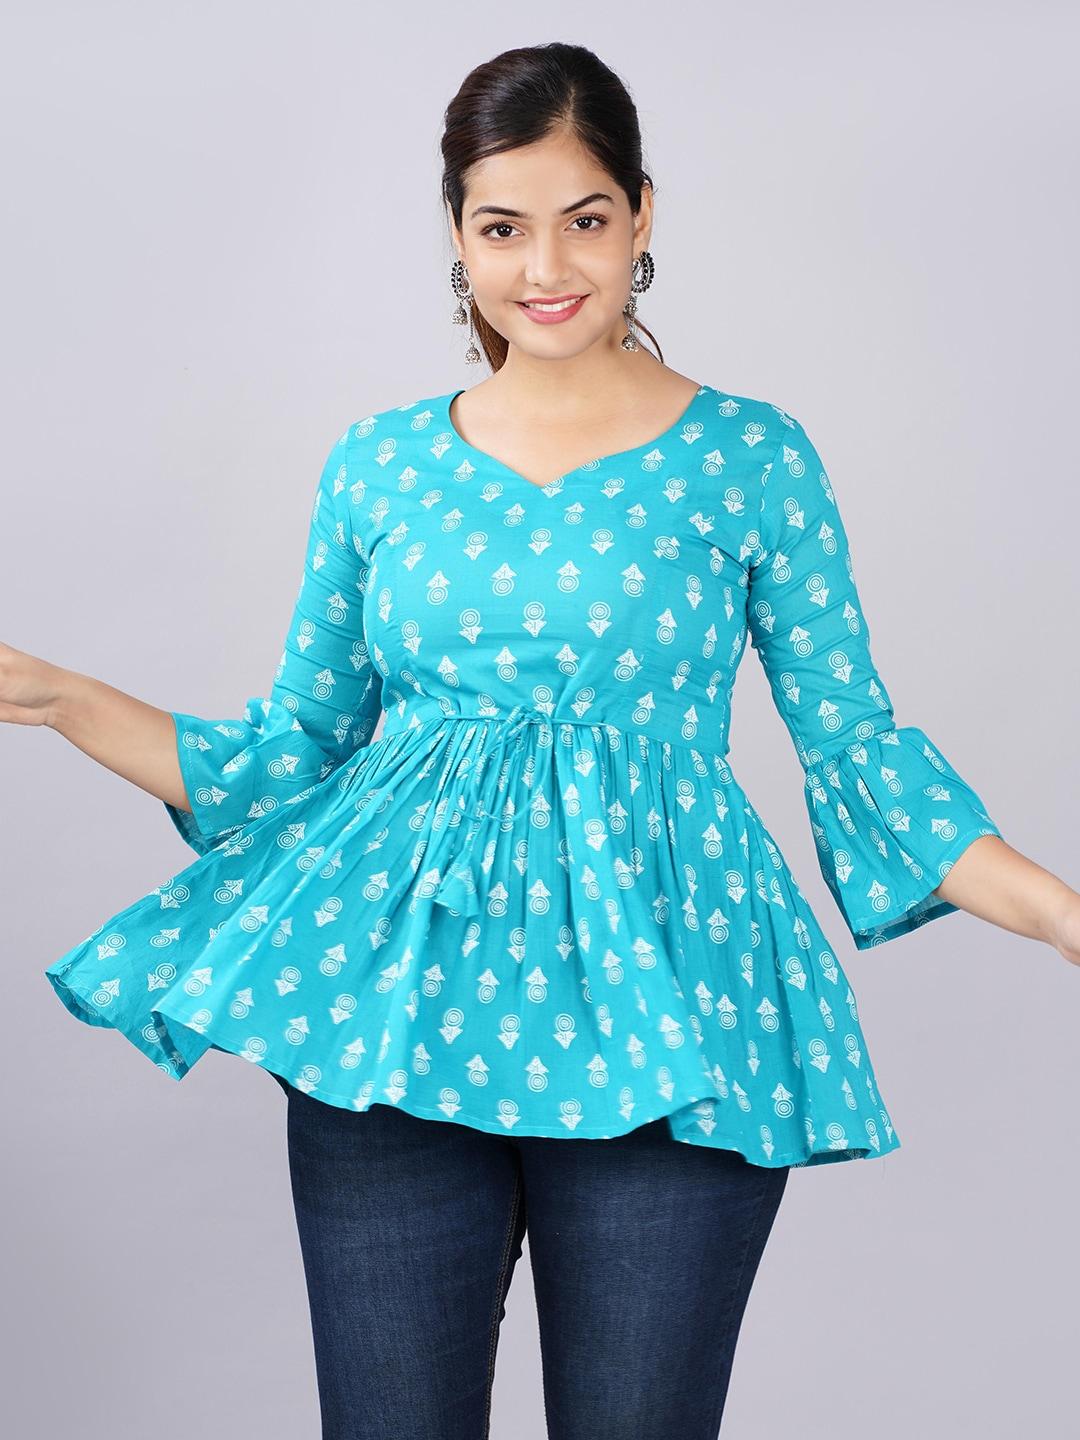 christeena-teal-&-white-floral-printed-cotton-empire-top